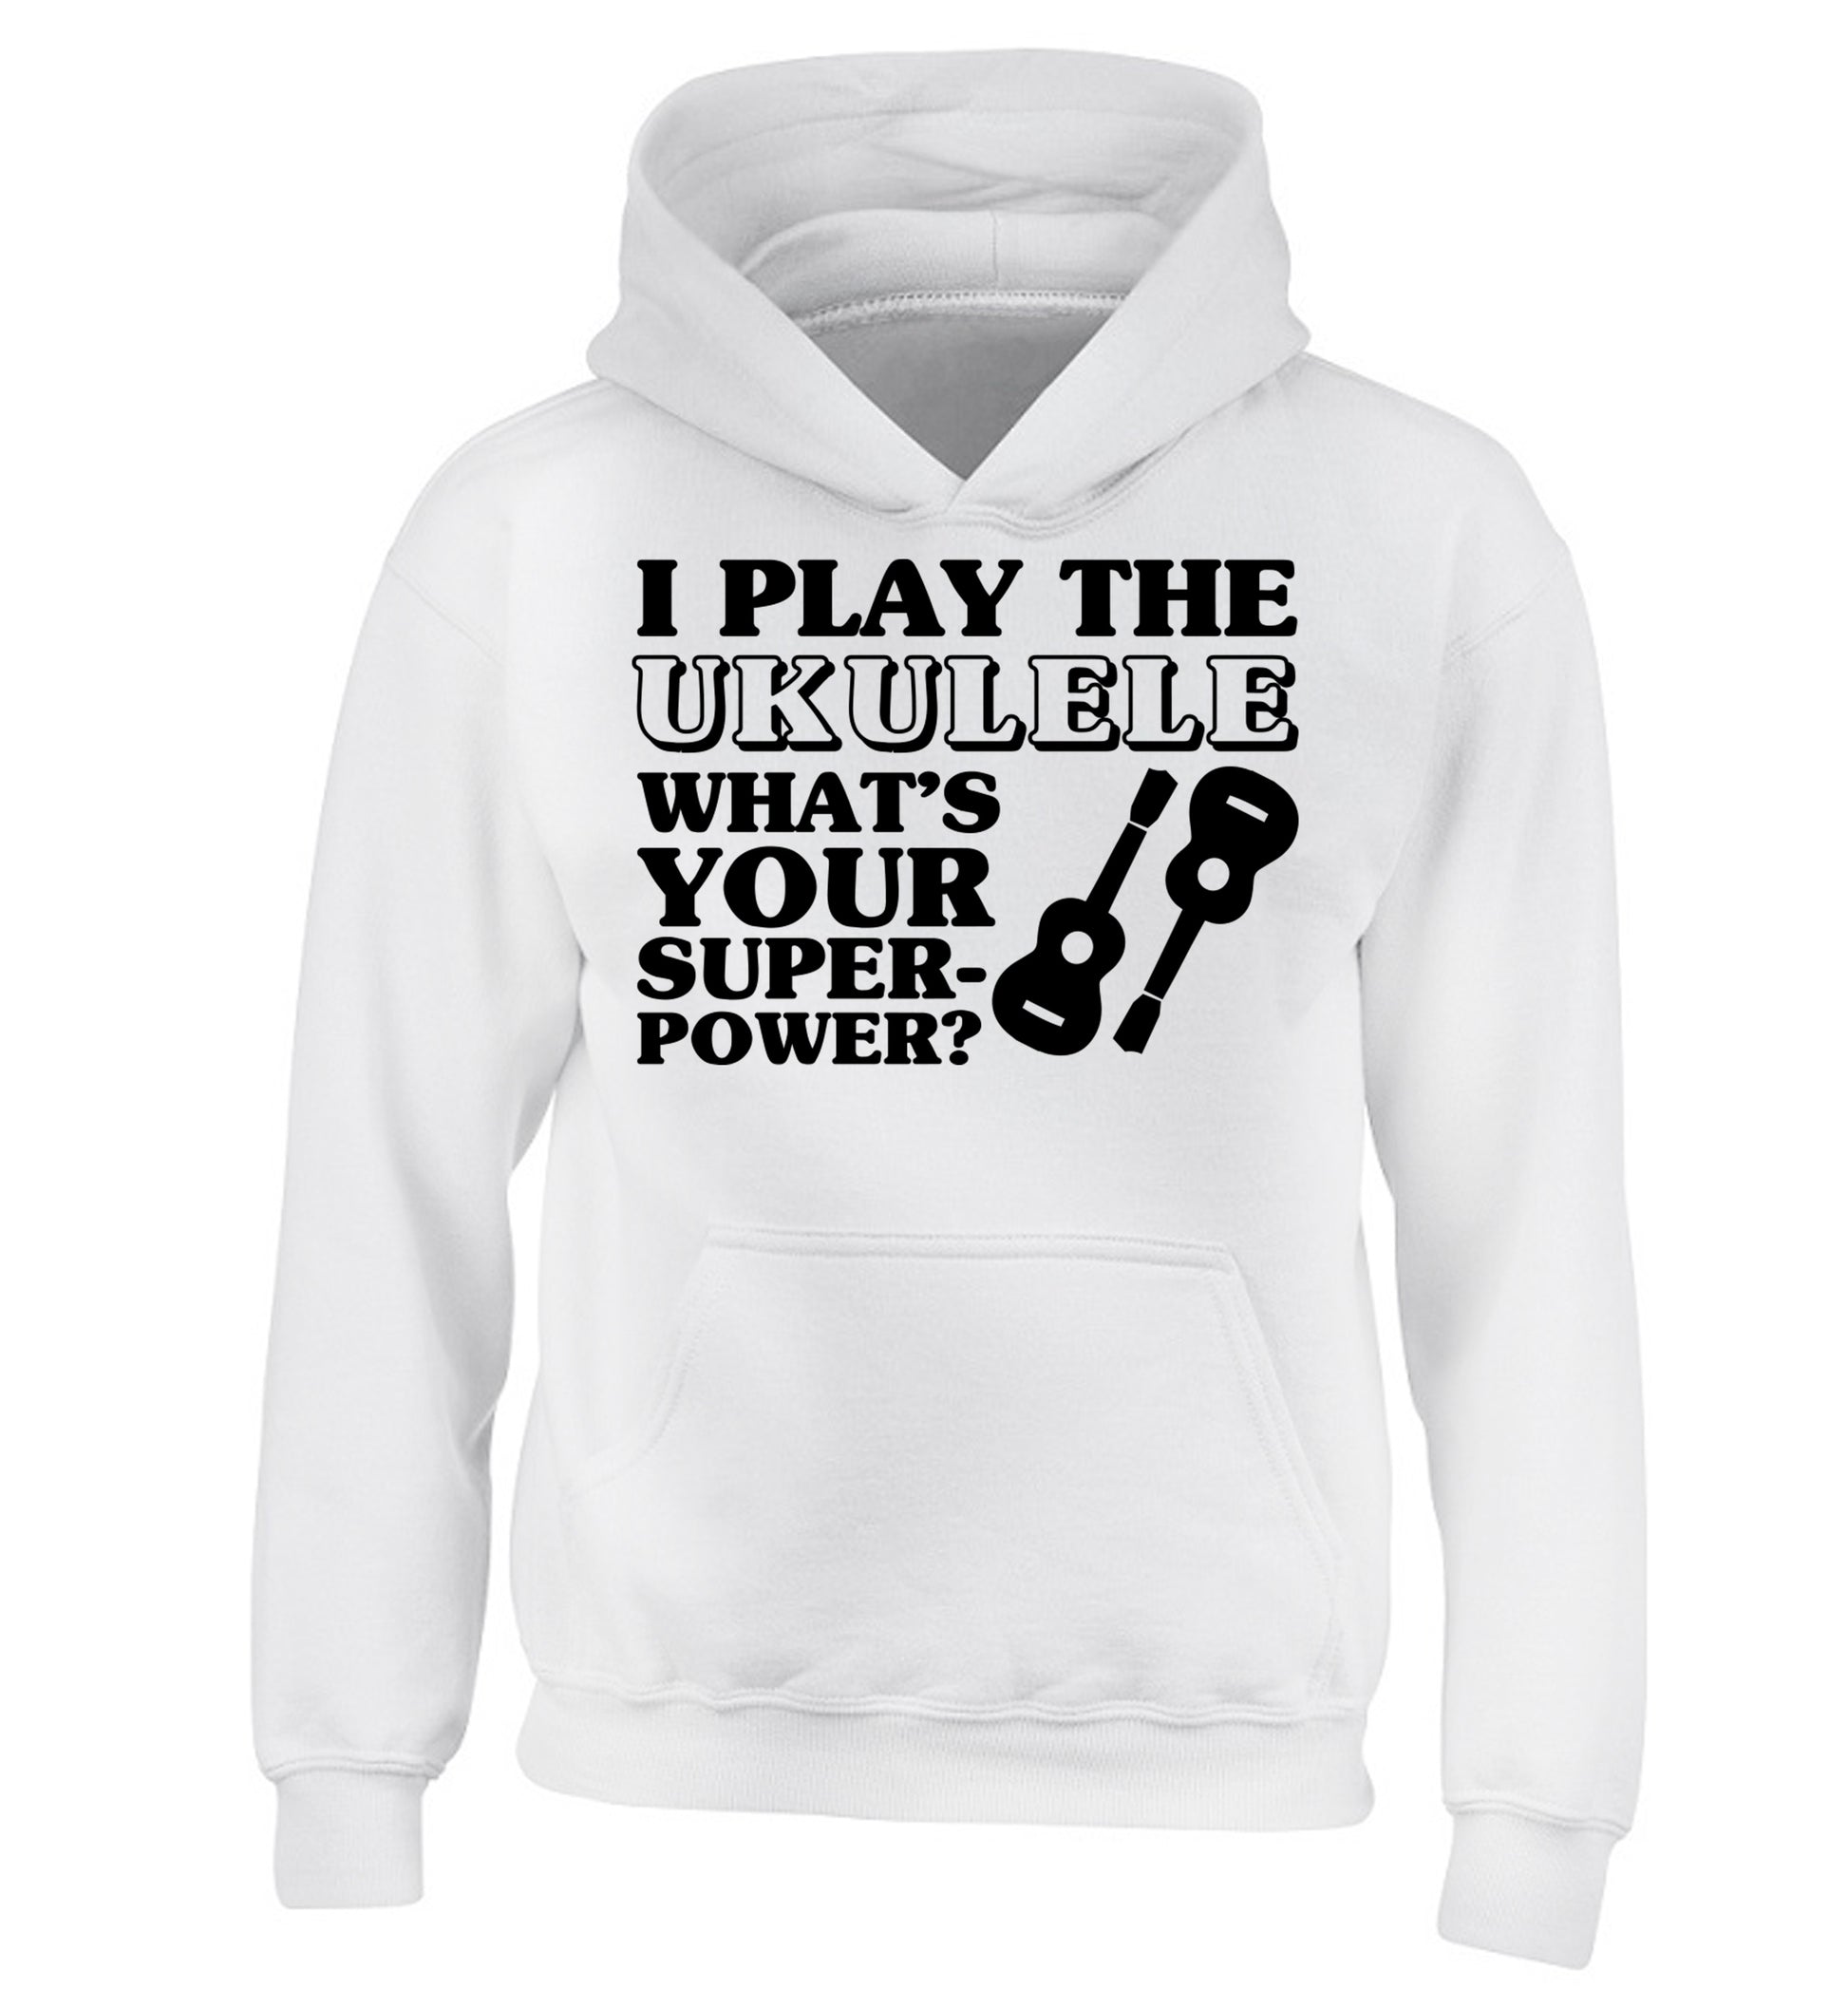 I play the ukulele what's your superpower? children's white hoodie 12-14 Years